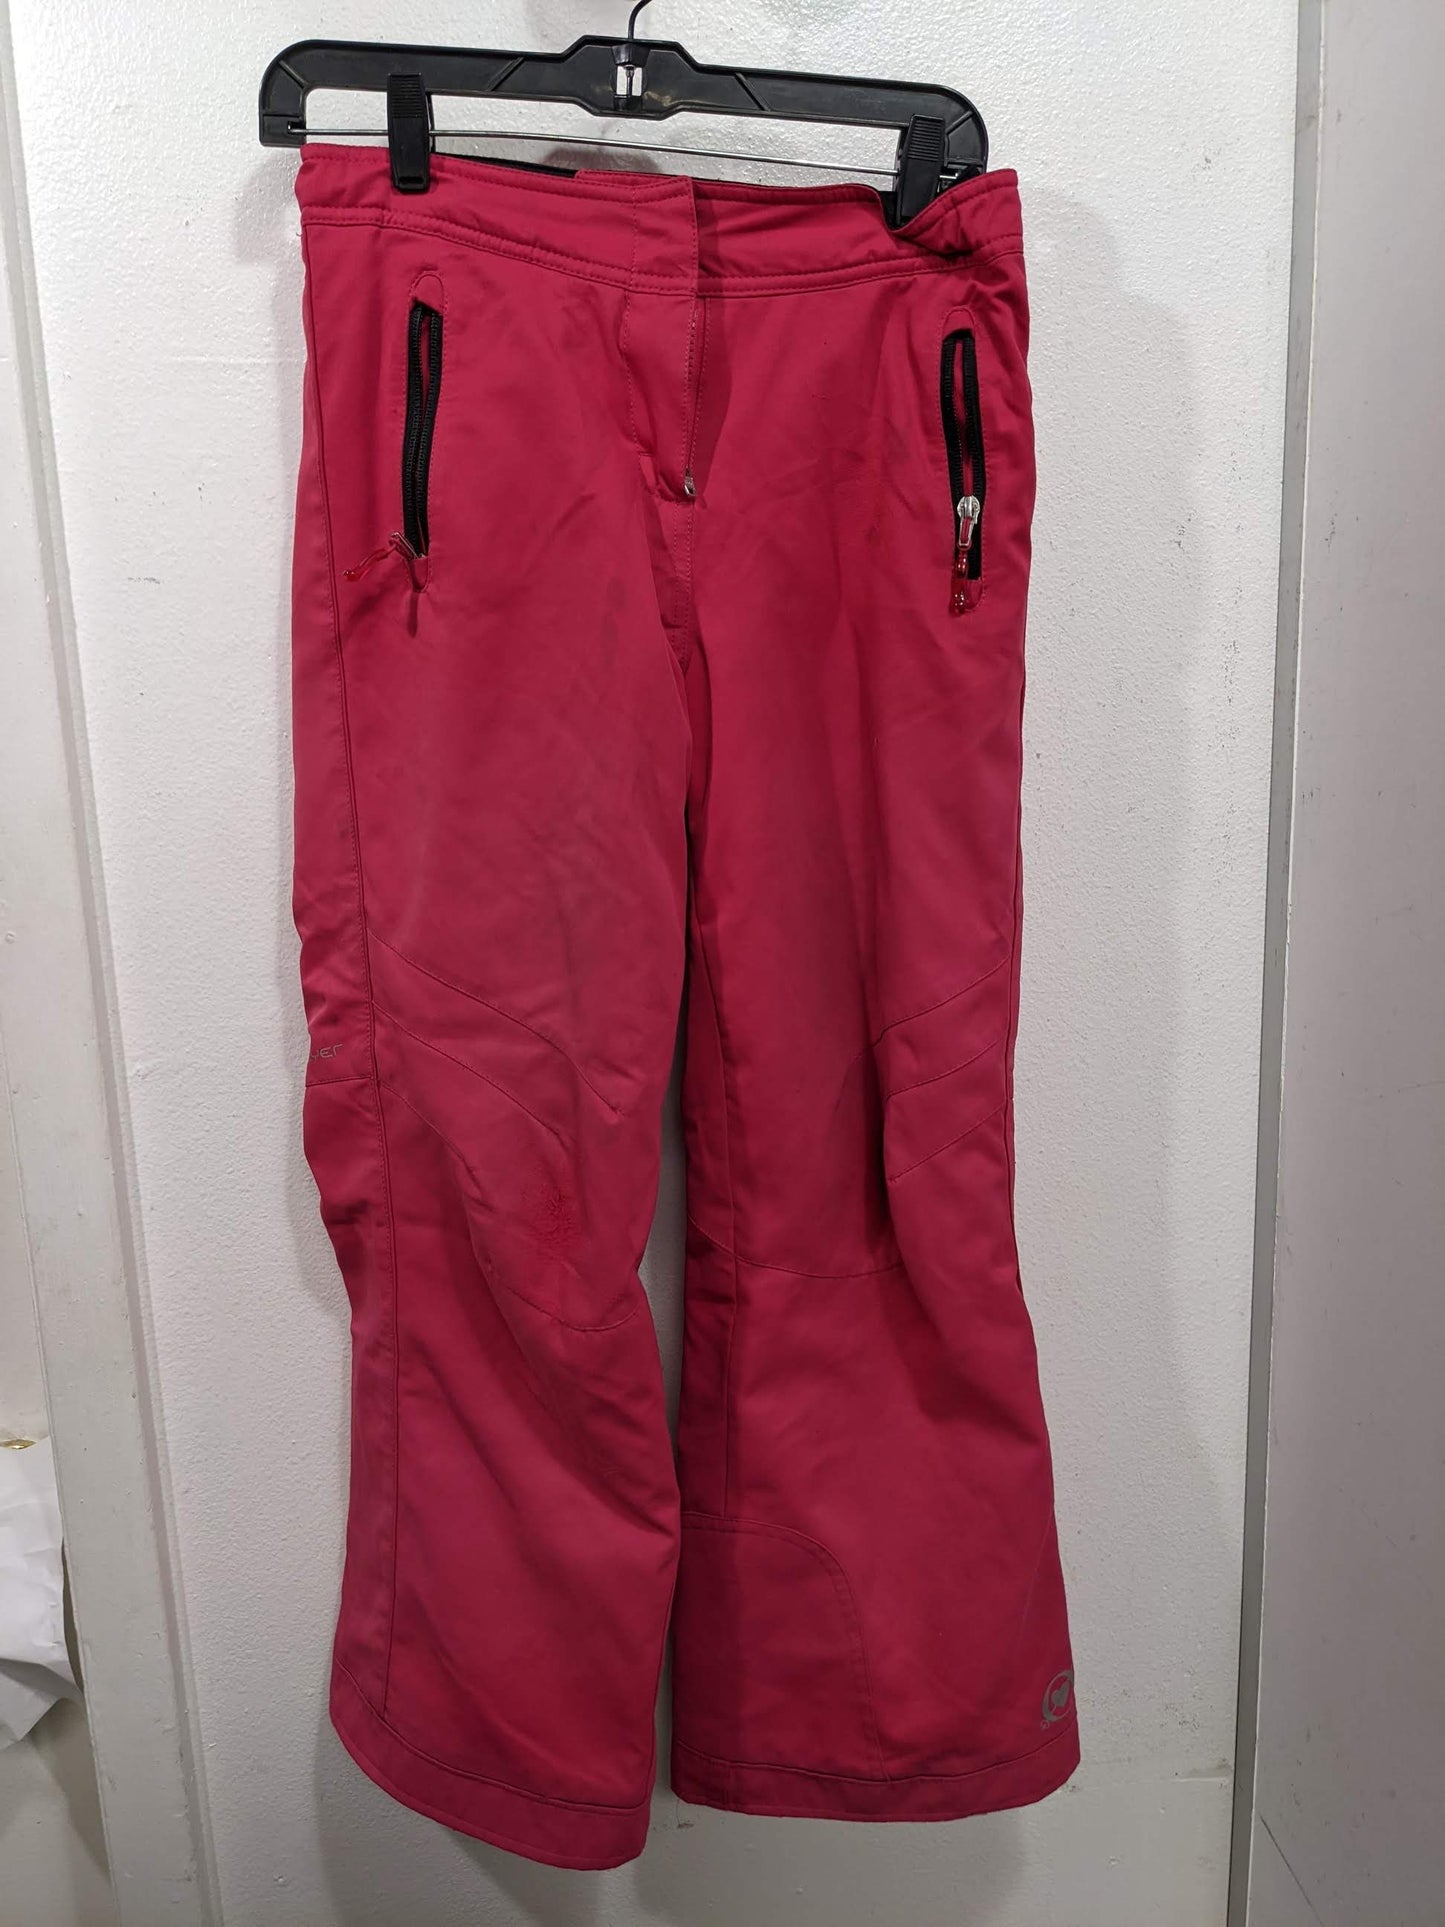 Obermeyer EWS Youth Ski/Board Pants Size 12 Youth Large Pink Used Coat